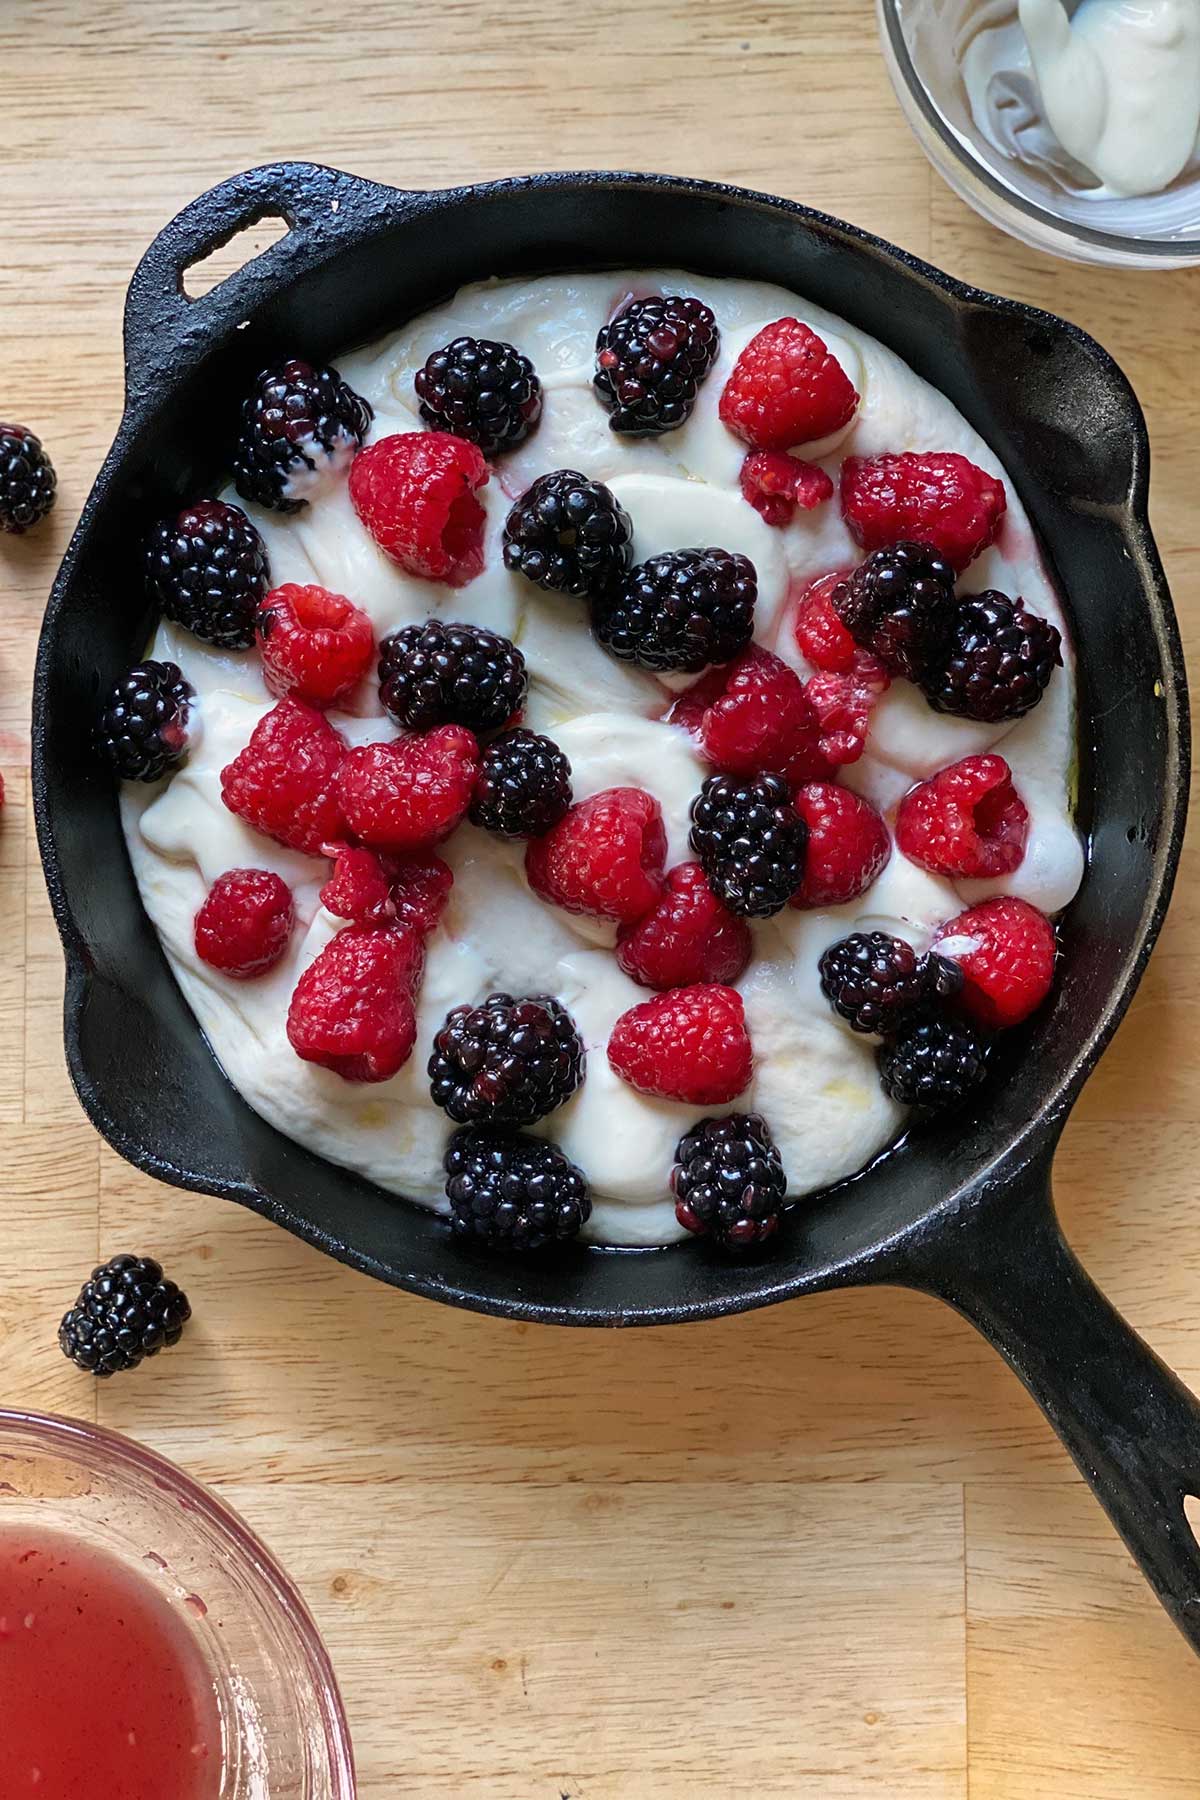 Pizza dough in a cast iron pan topped with sweetened mascarpone and fresh berries